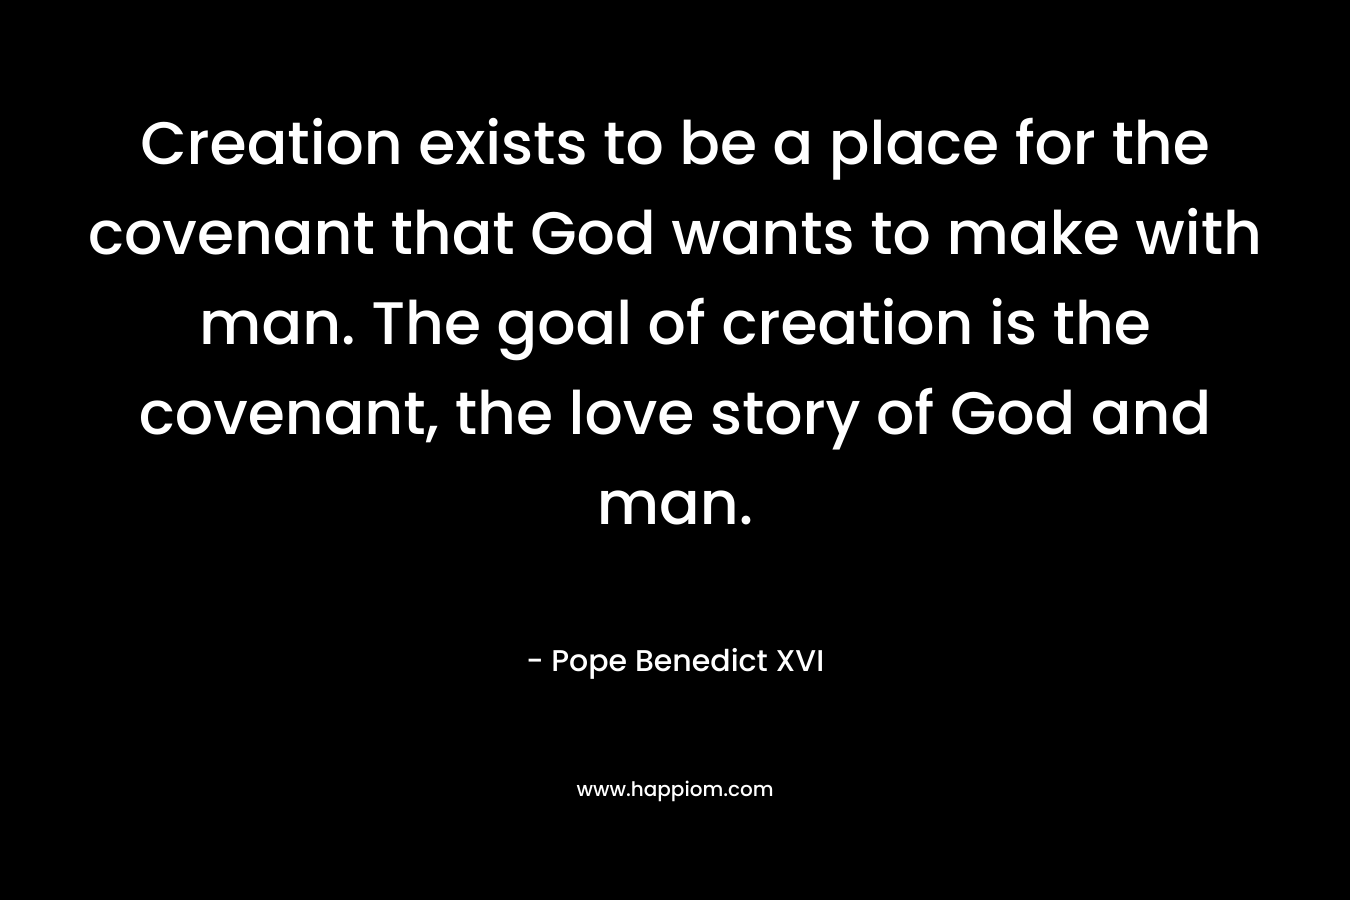 Creation exists to be a place for the covenant that God wants to make with man. The goal of creation is the covenant, the love story of God and man.